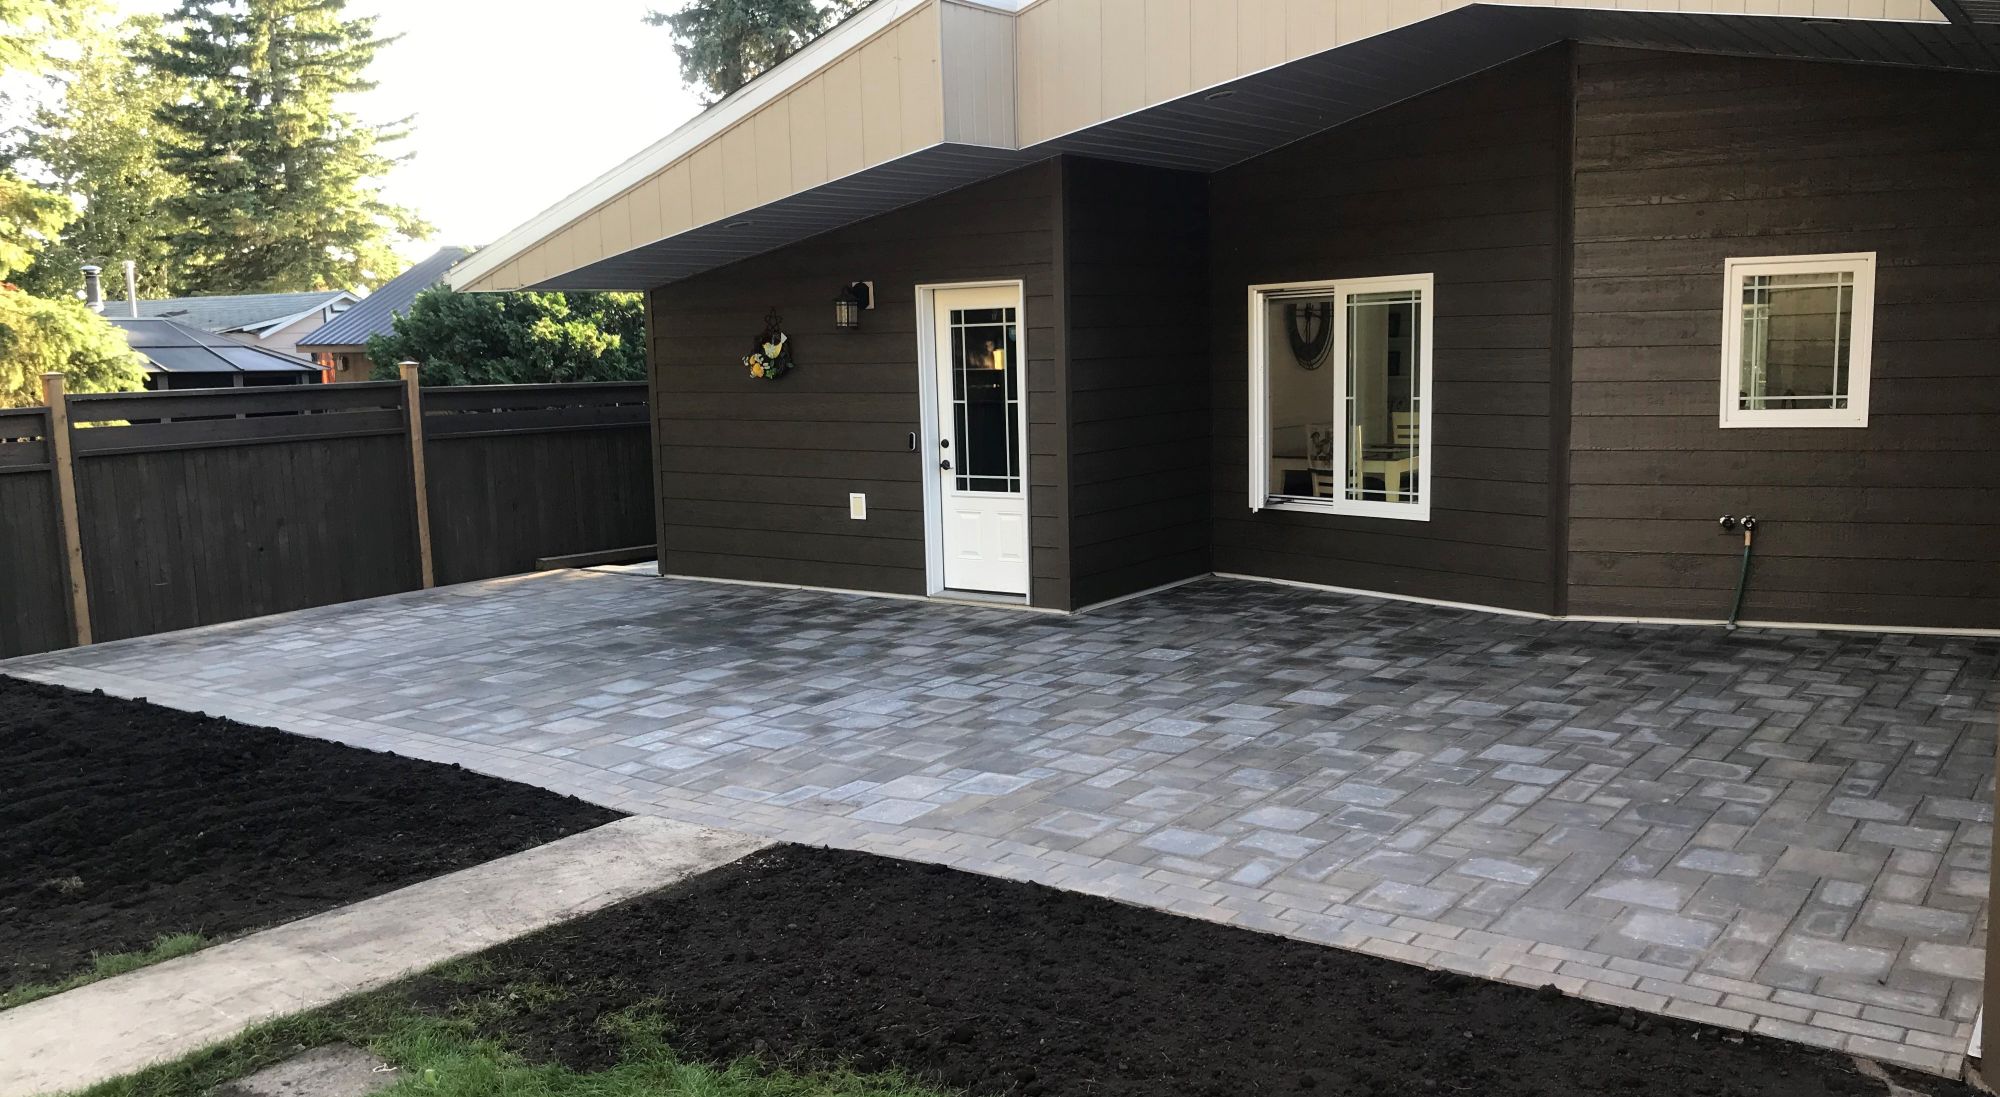 A newly constructed paving stone patio